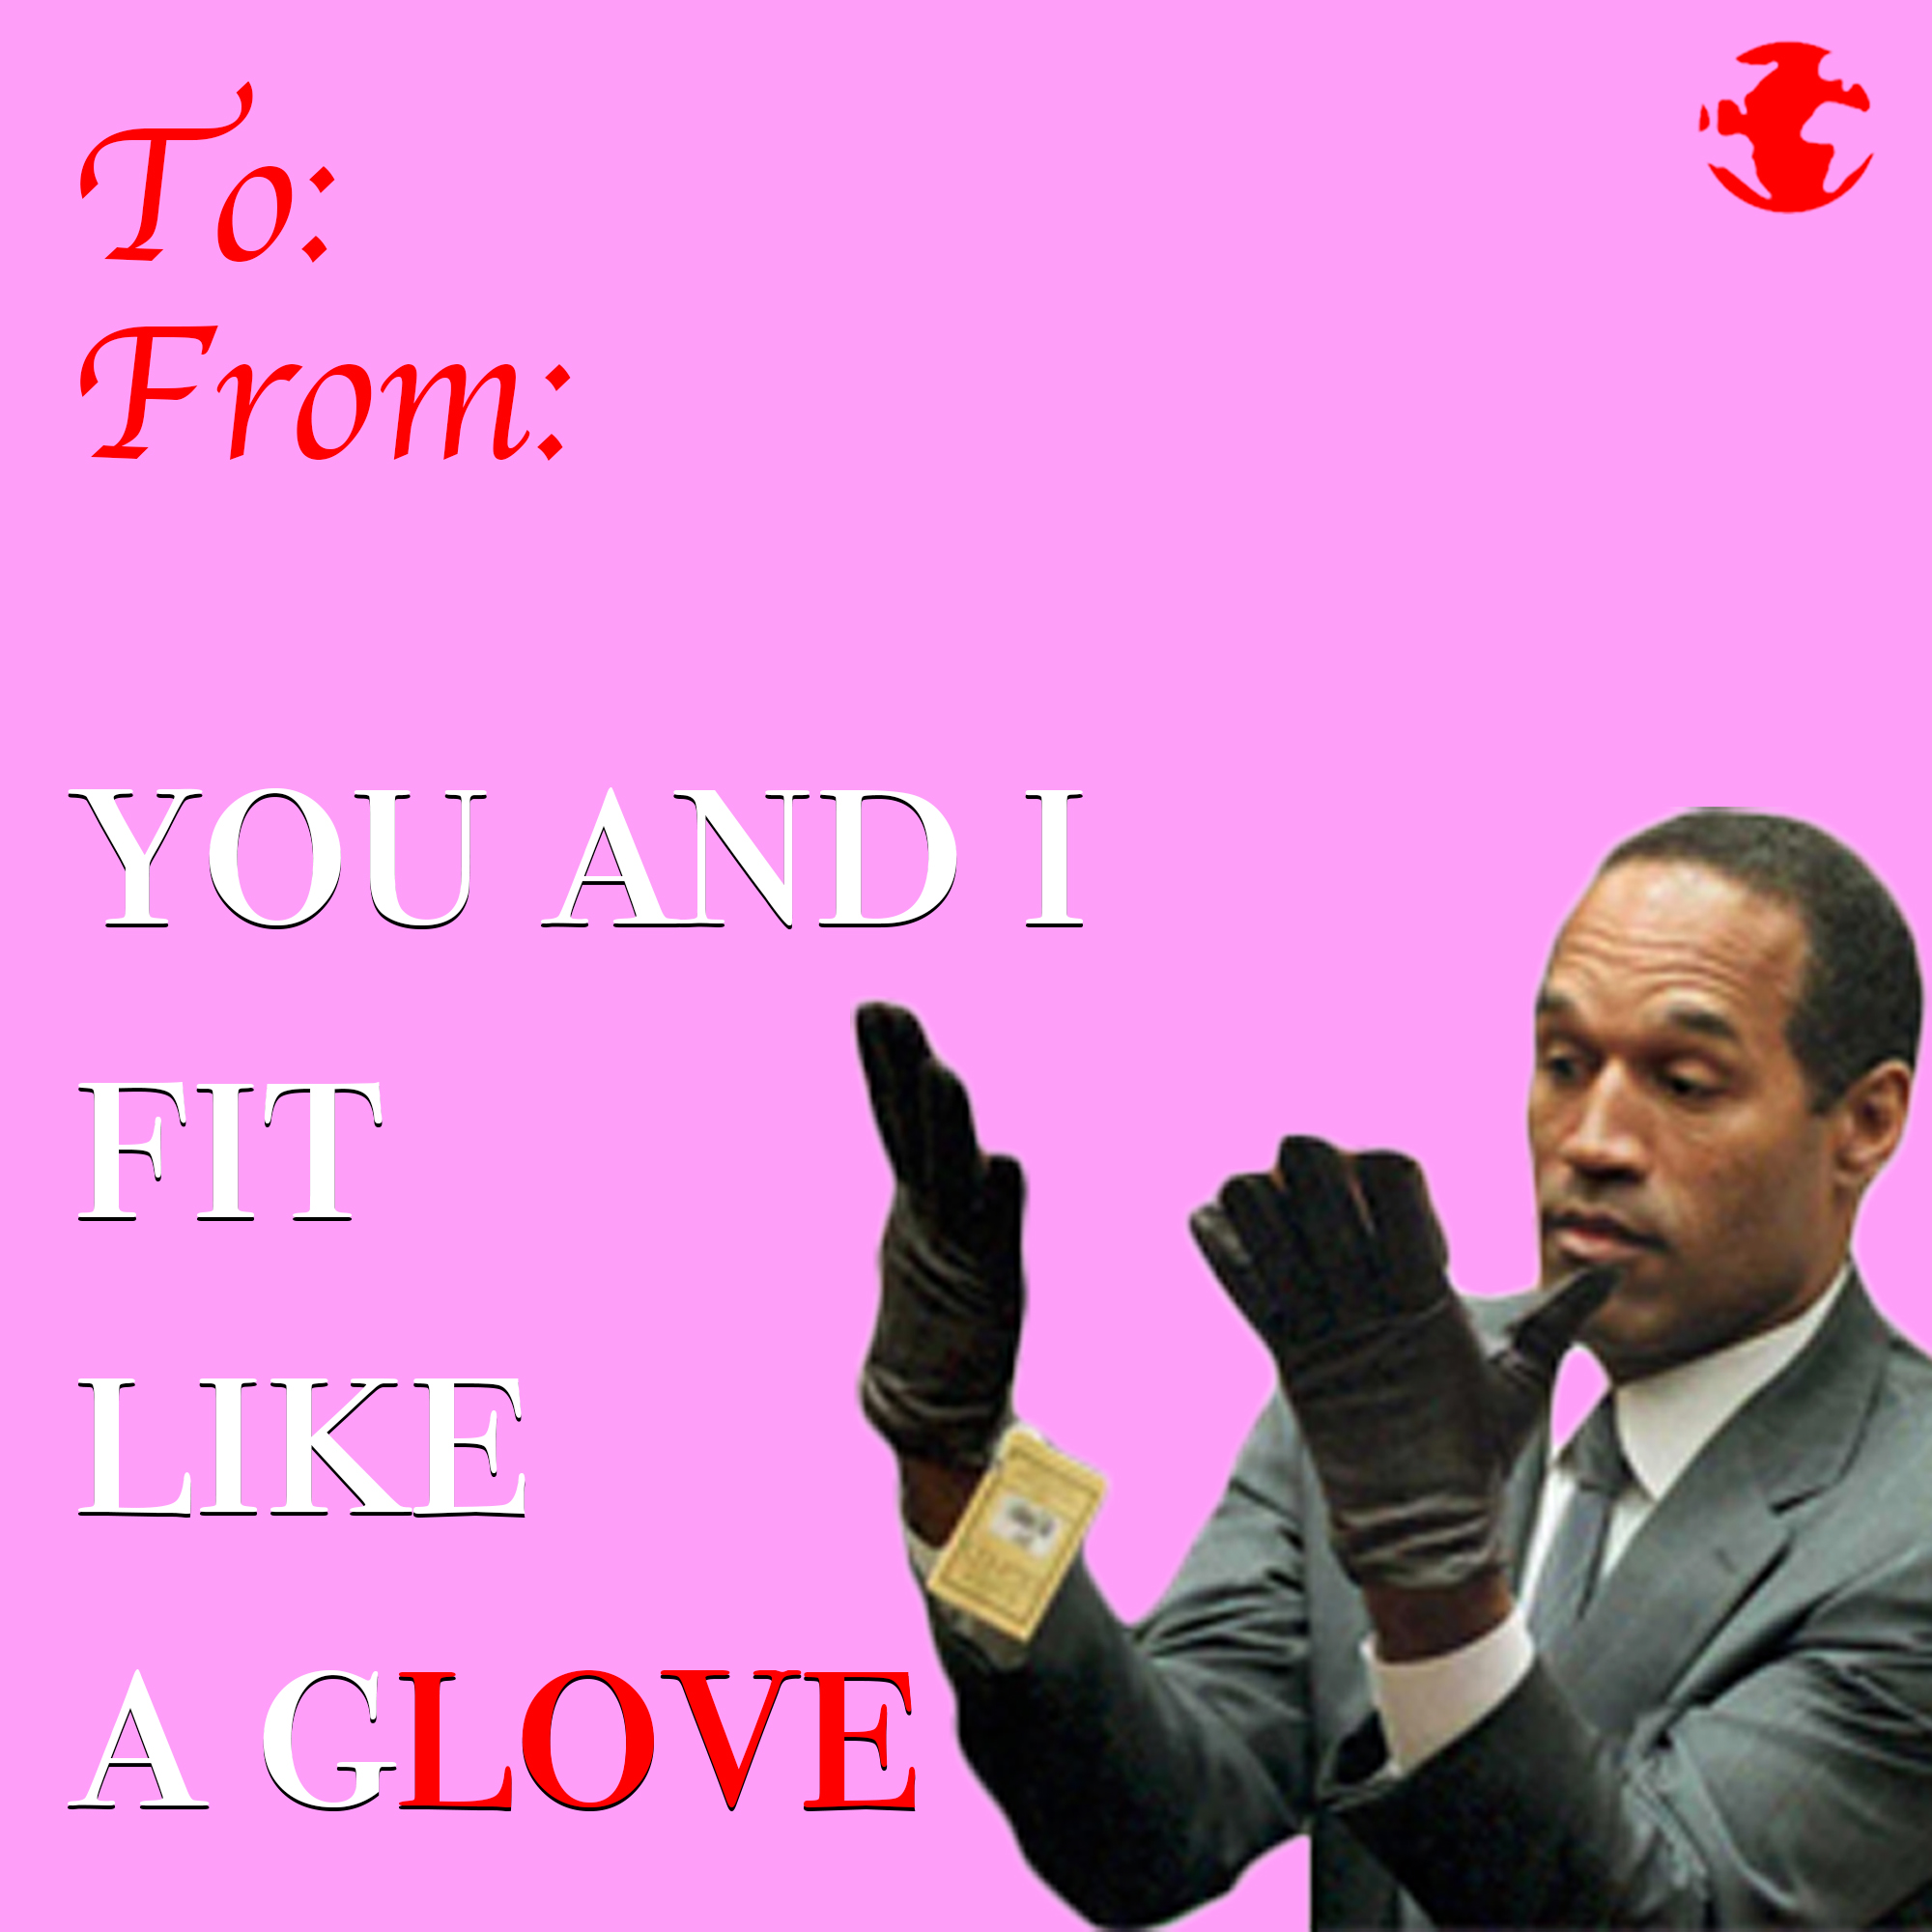 eBaum's Valentine's Day Cards 2022 - glove didn t fit - To From You And I Fit A Glove